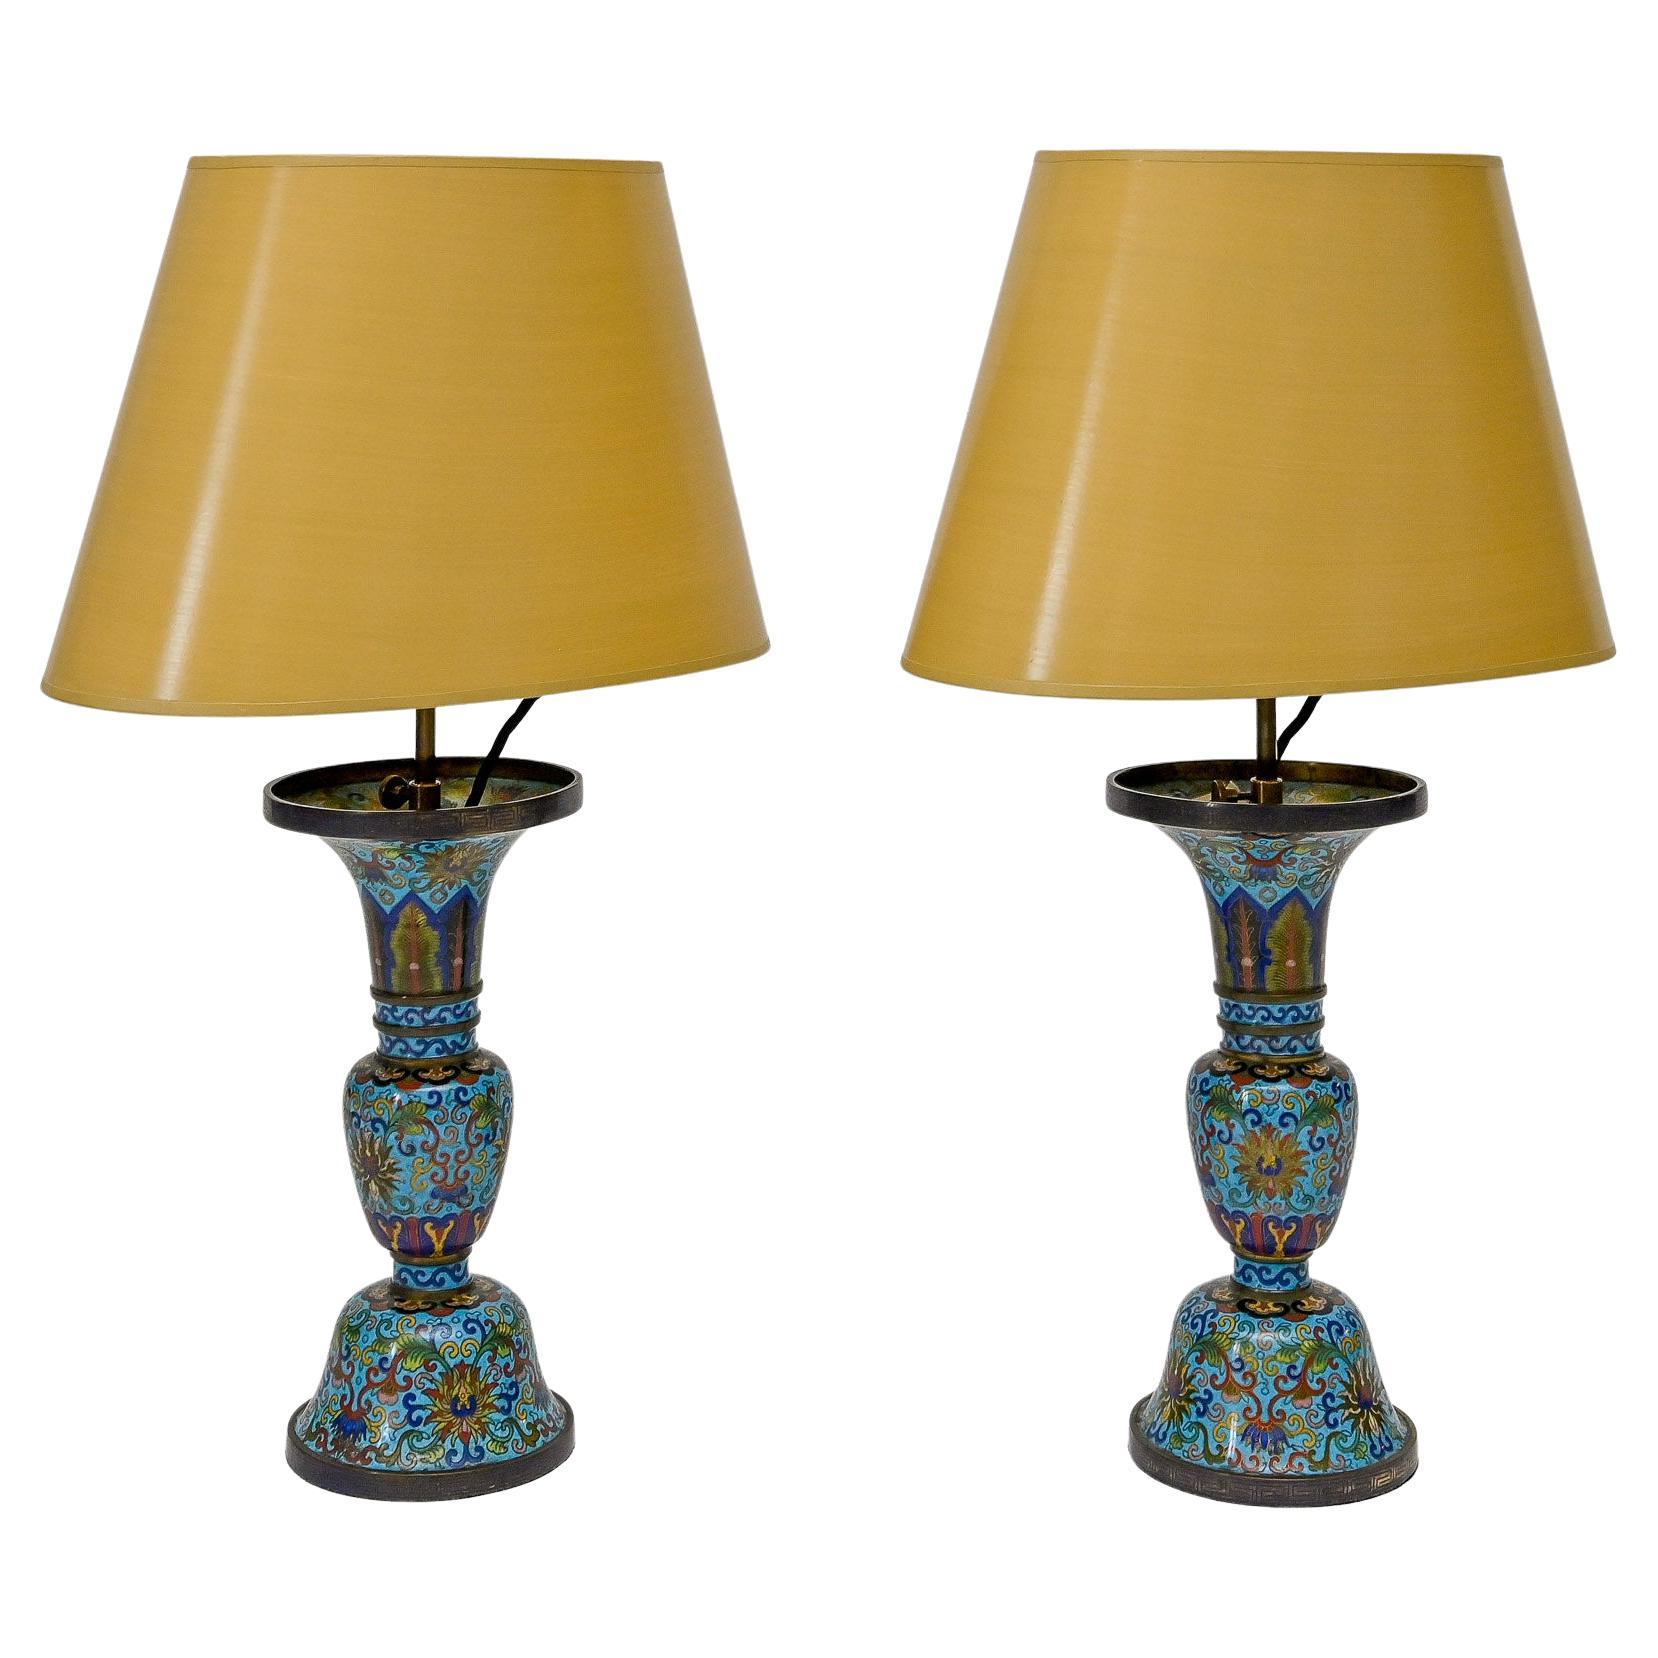 19th Century Pair of Cloisonnè Vases with Later Worked Electrification For Sale